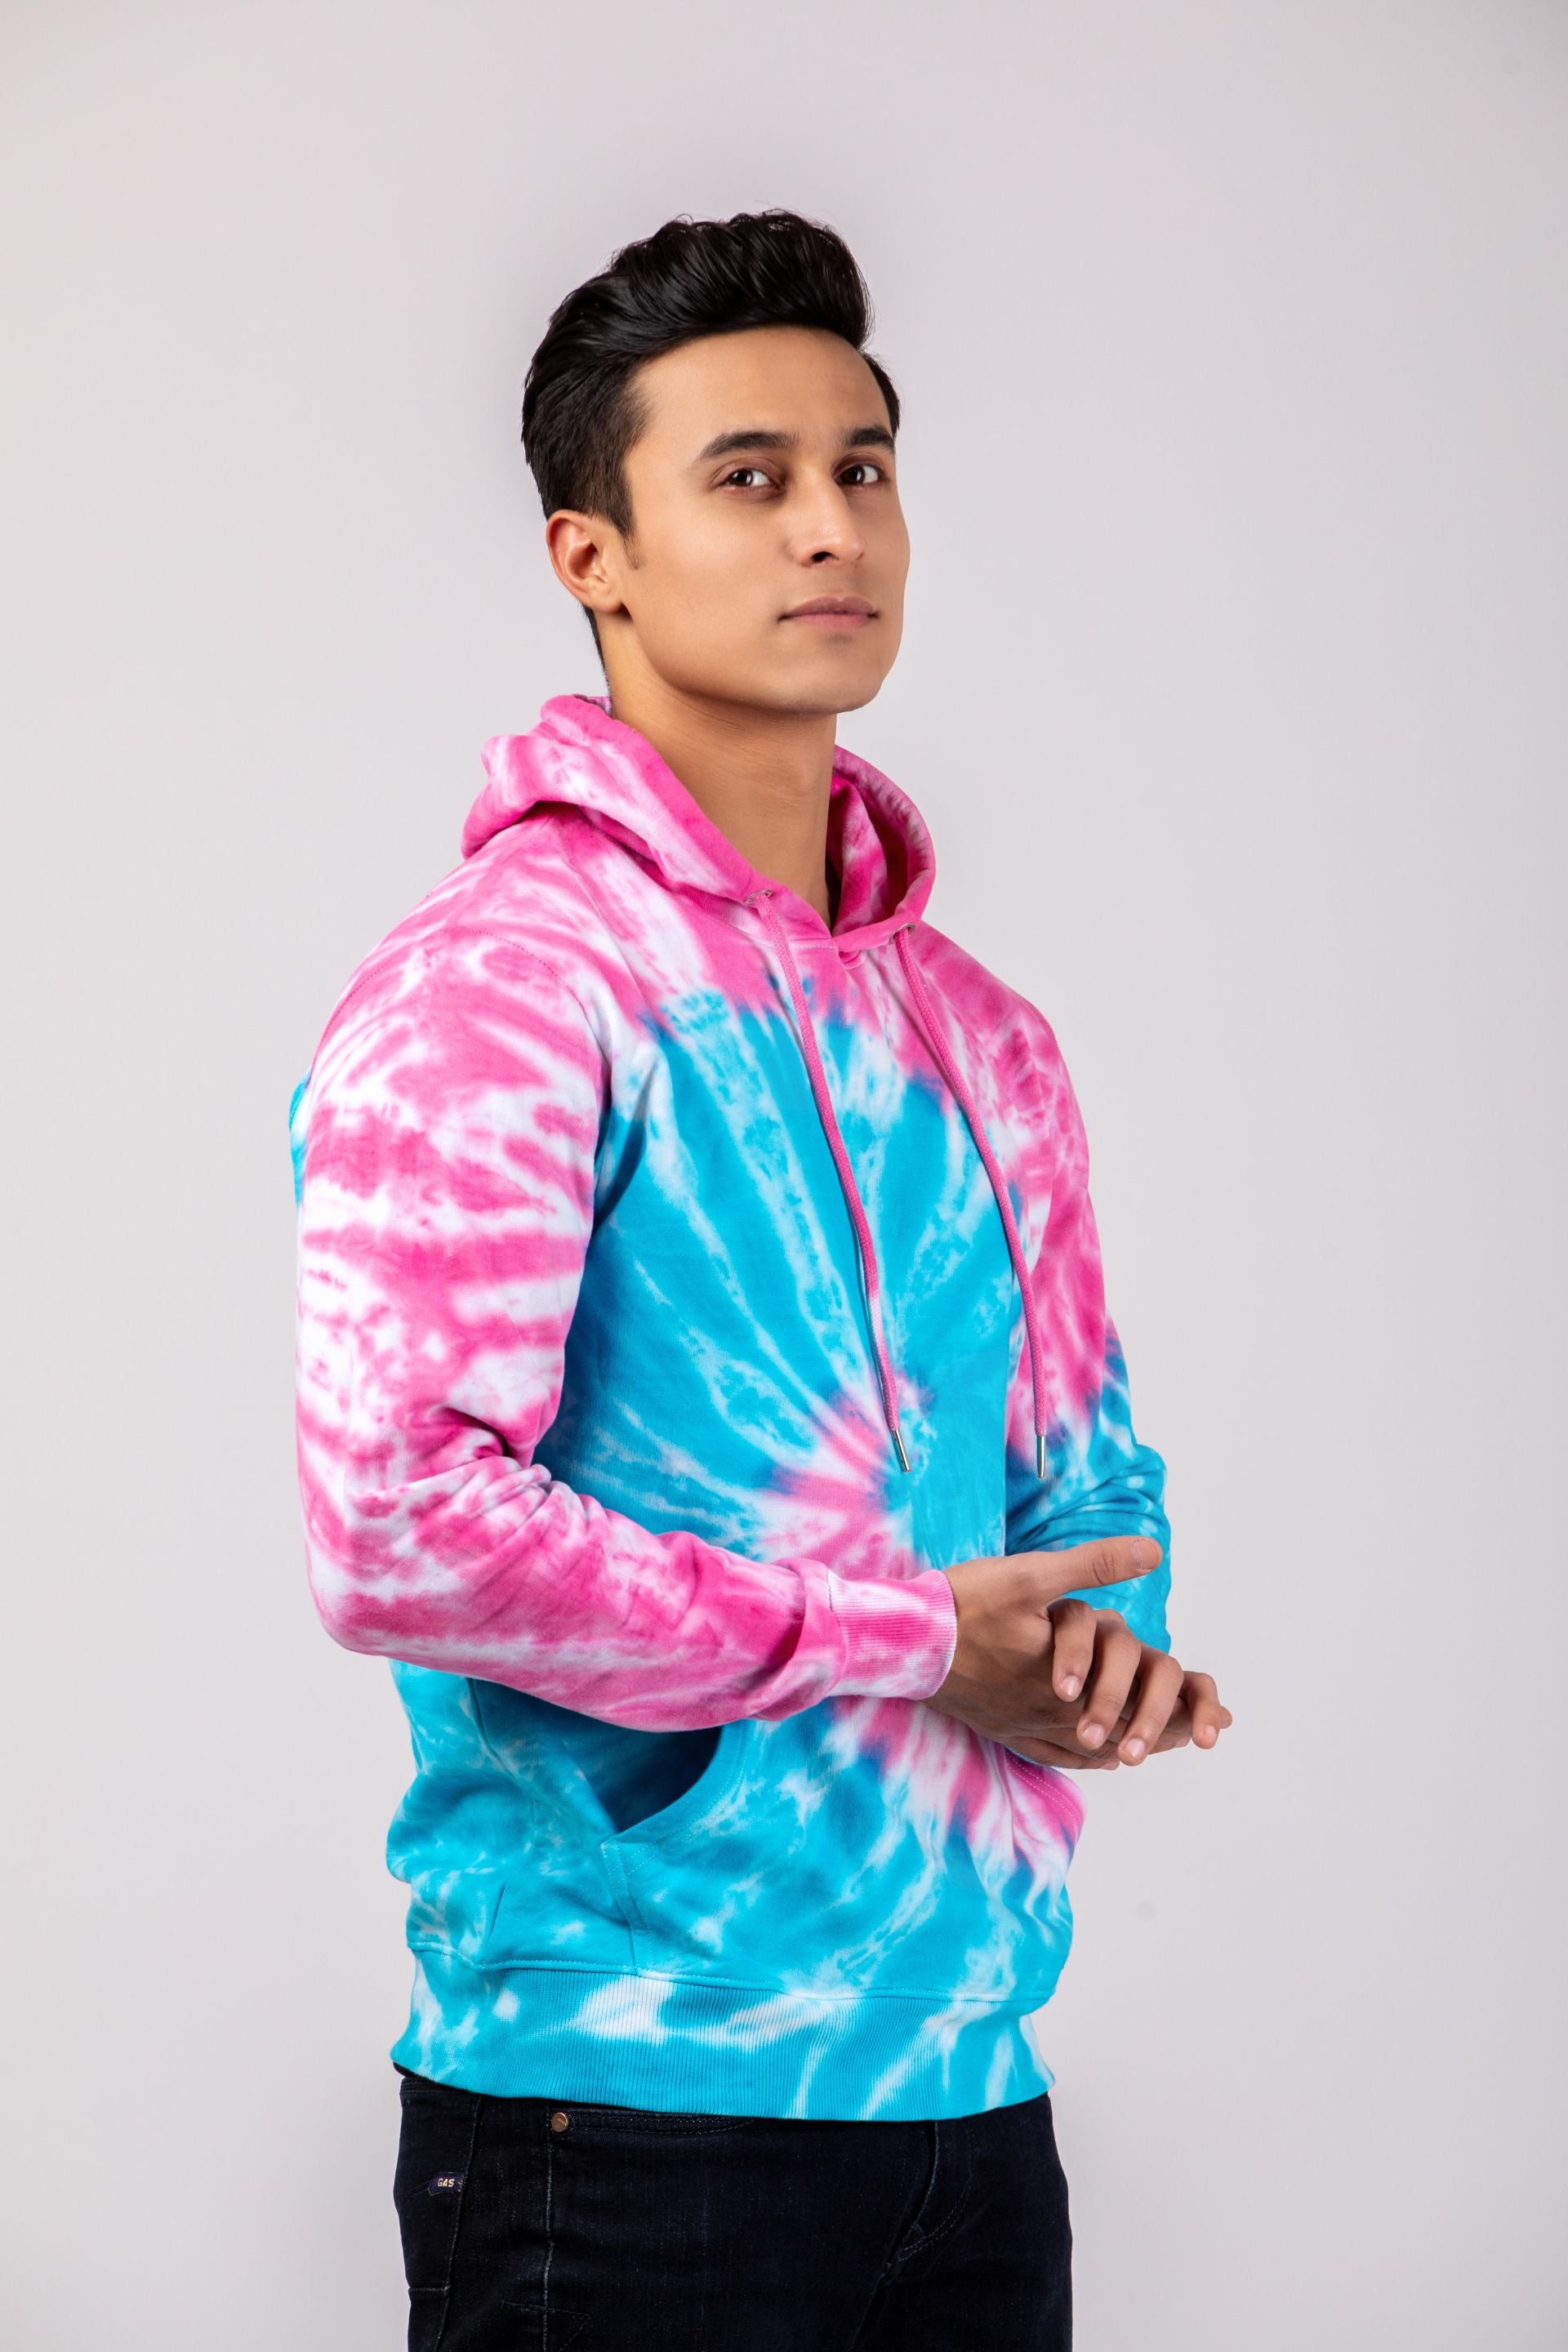 Firangi Yarn Super Soft Cotton Tie&Dye Blue and Pink Ombre Hoodie With Kangaroo Pockets